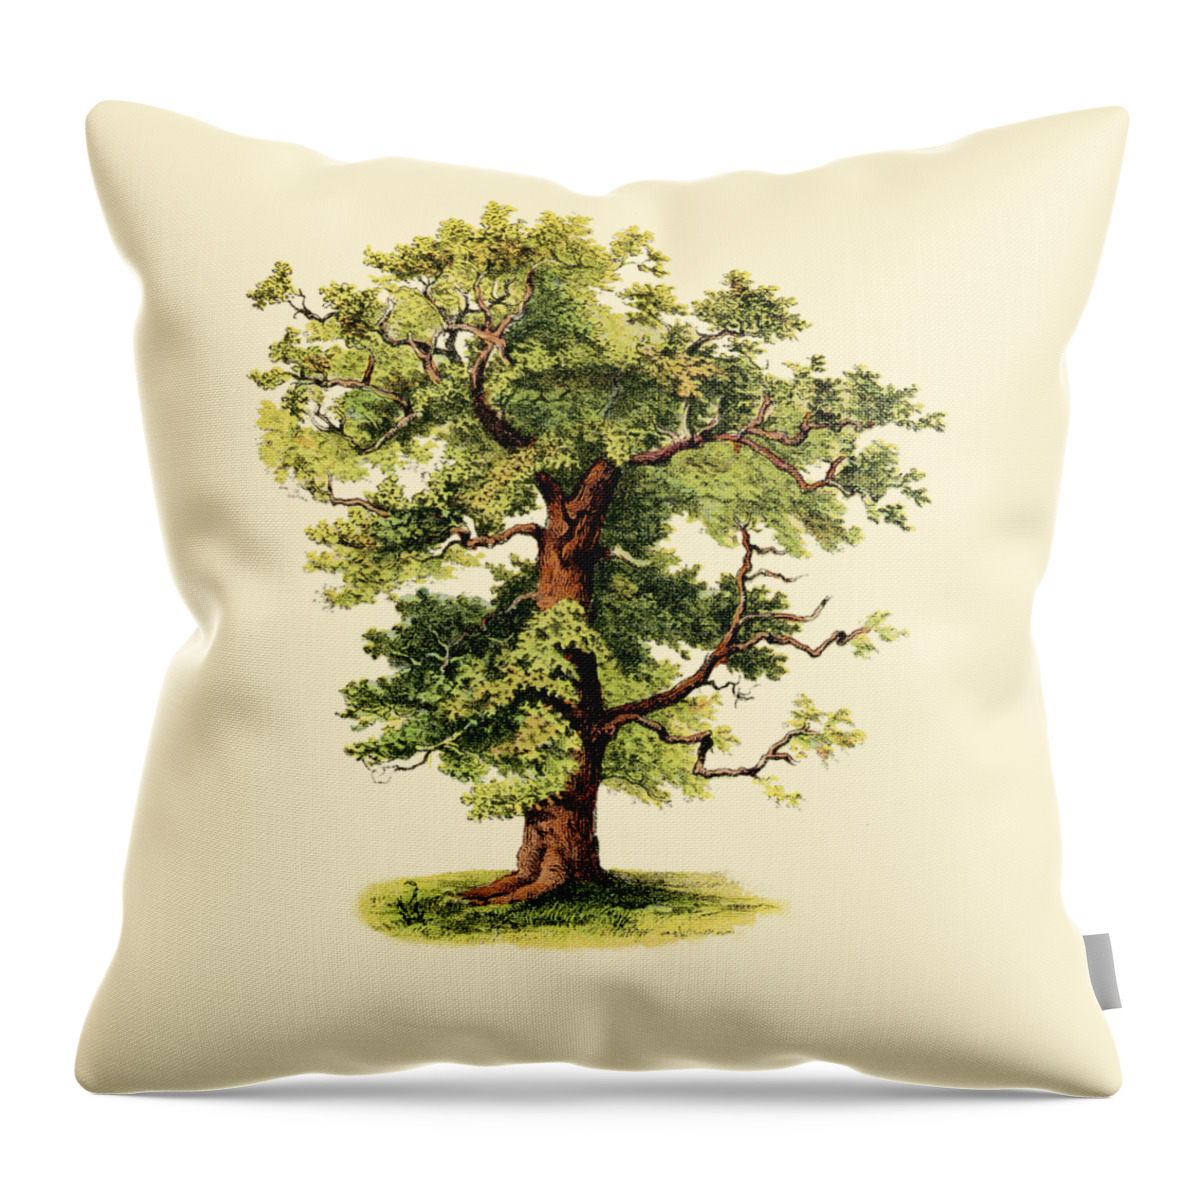 Oak Throw Pillow featuring the digital art Forest Tree by Madame Memento